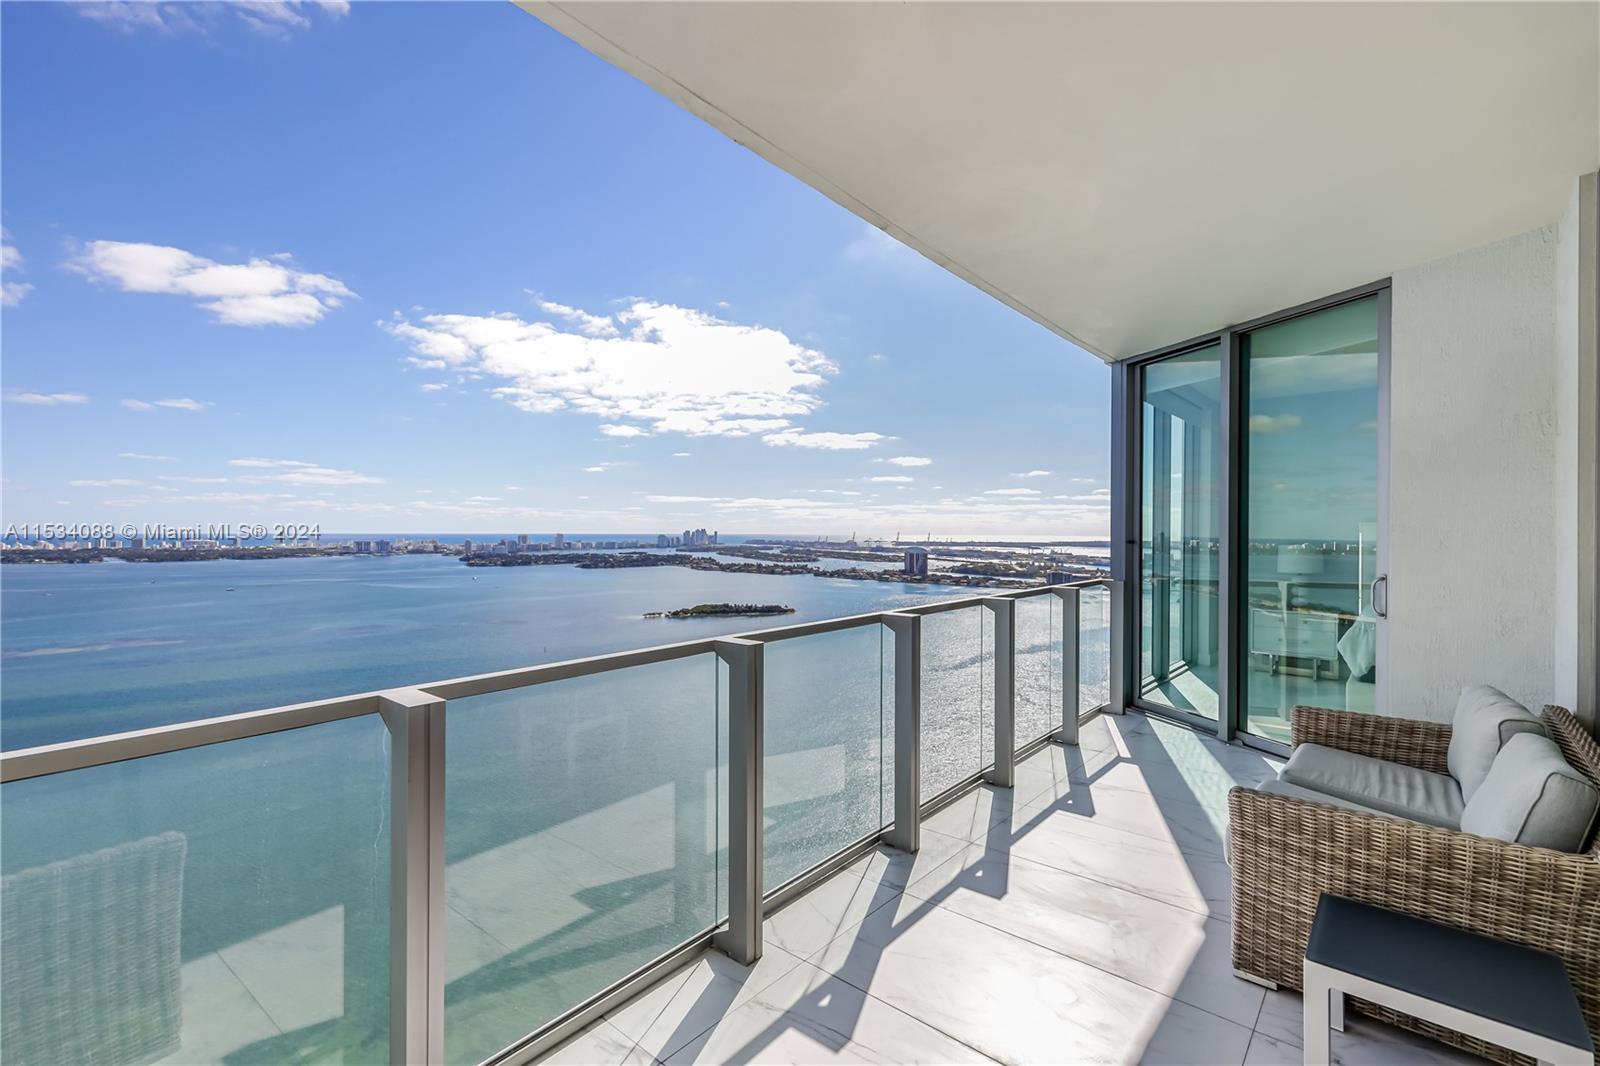 Floating high above the skyline with views clear to the ocean, Biscayne Beach Residence 4304 is the 